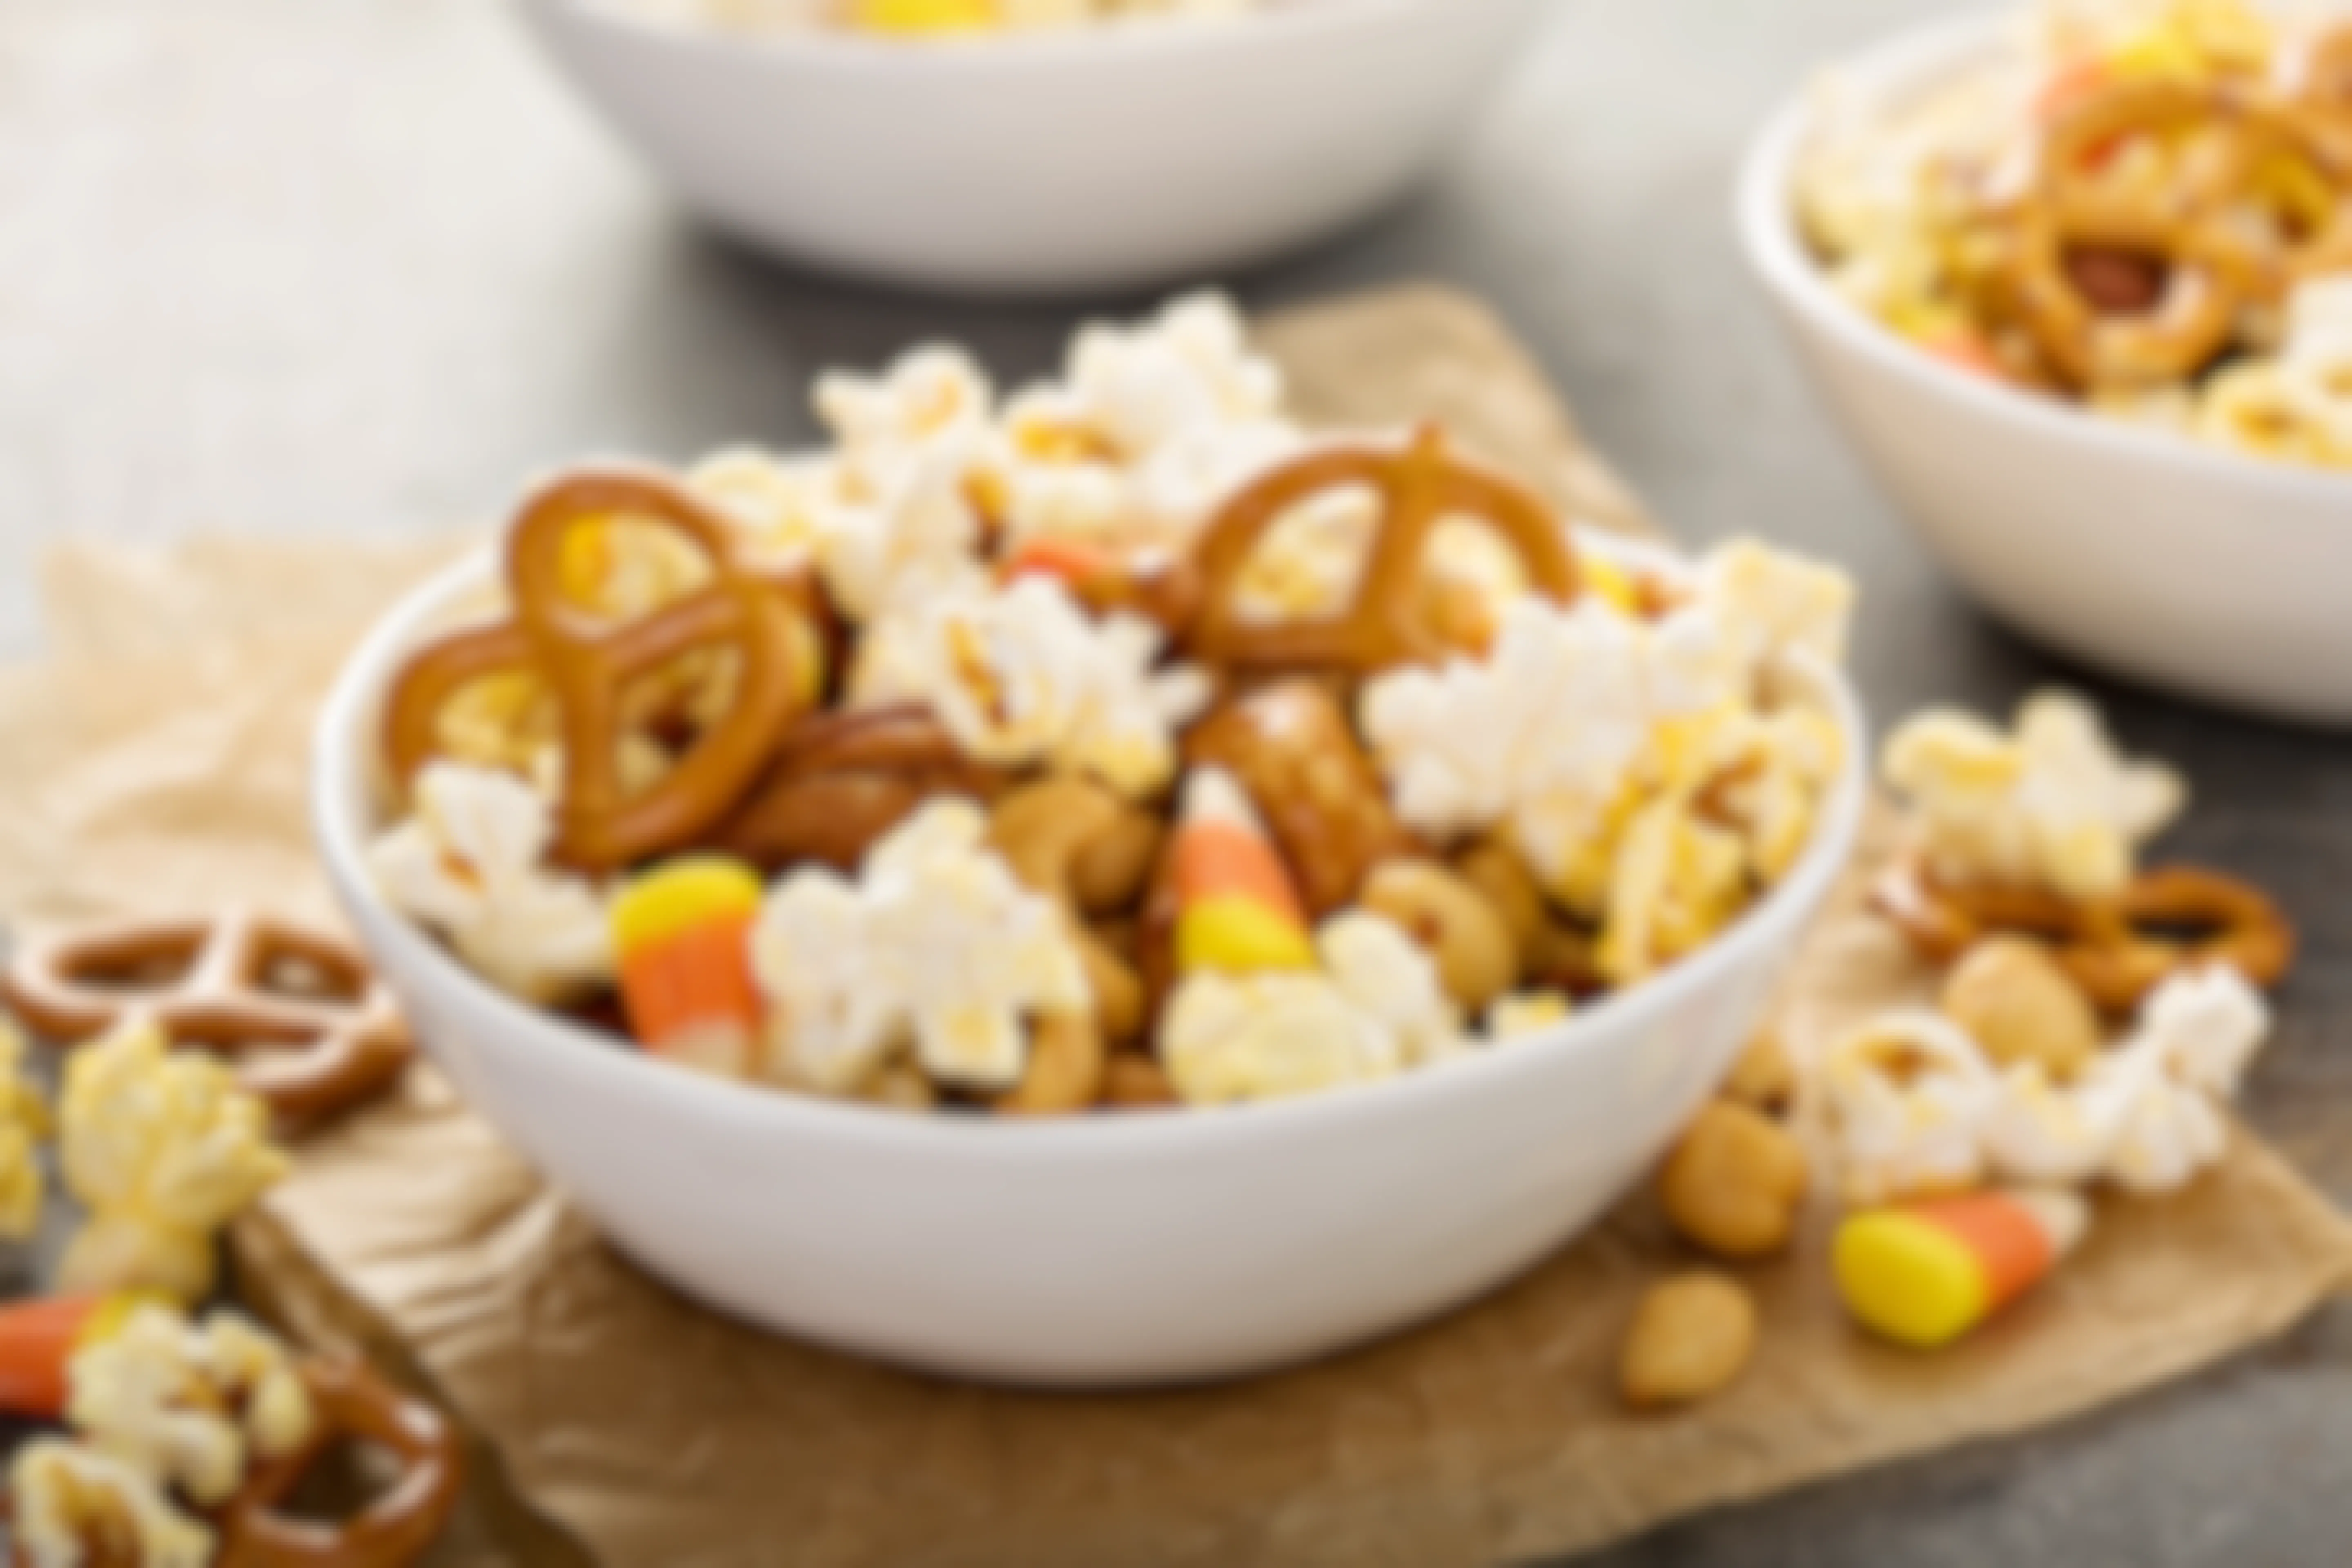 A homemade trail mix made with popcorn, pretzels, and leftover Halloween candy.